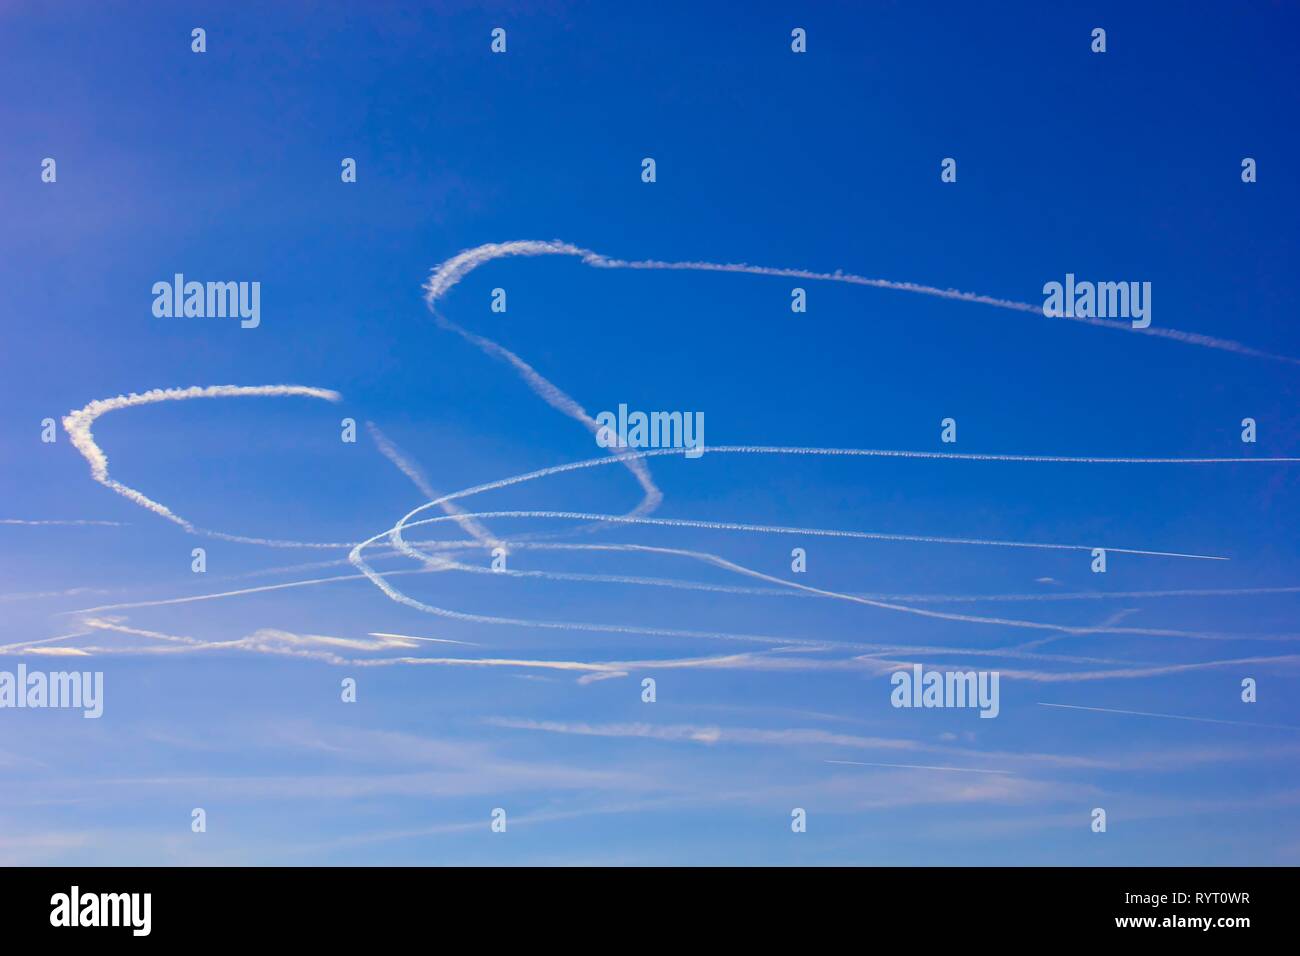 Condensation trails in the sky, Munich, Bavaria, Germany Stock Photo